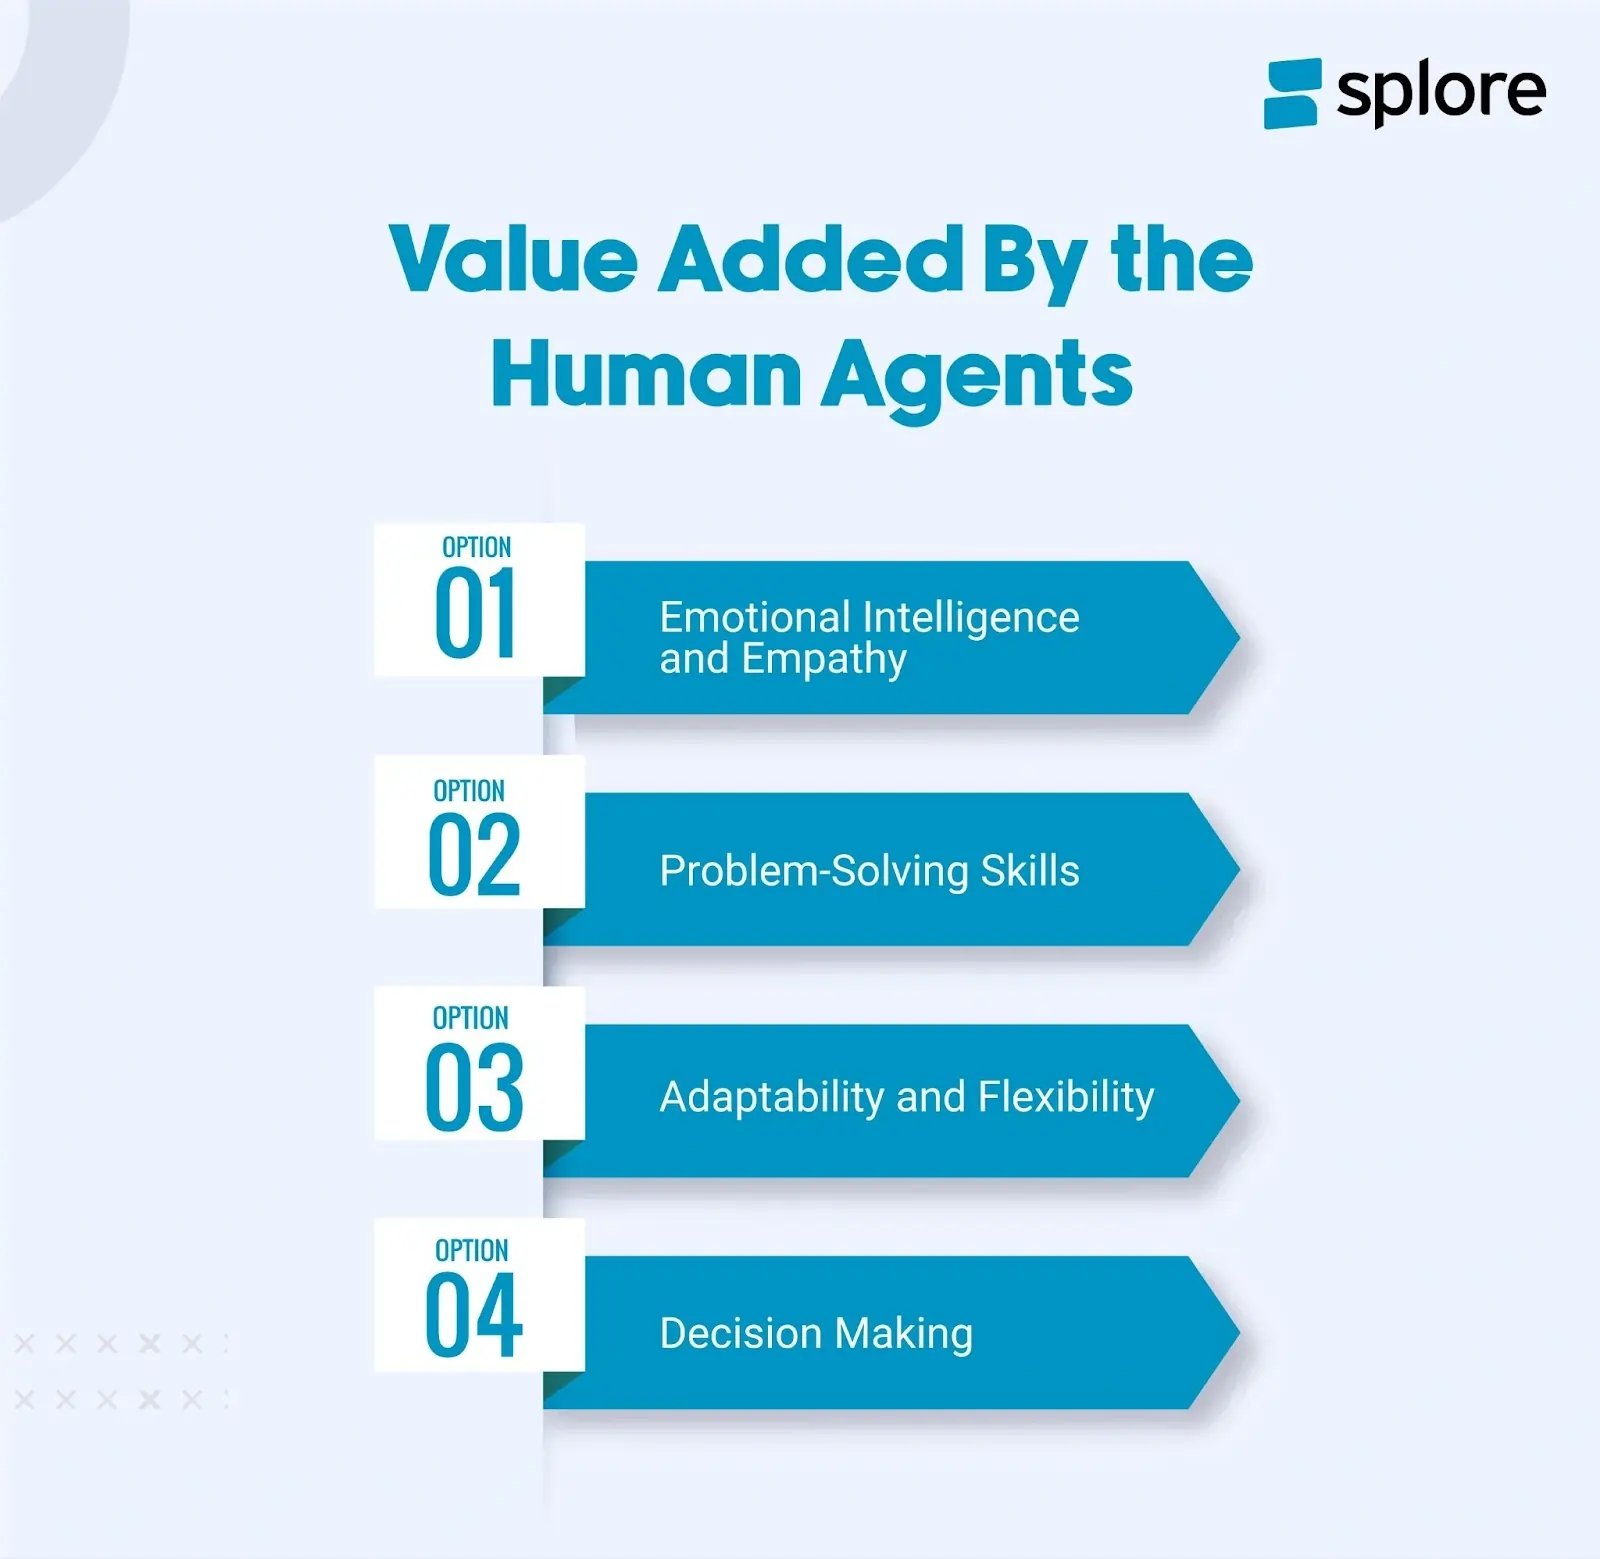 Value Added By the Human Agents